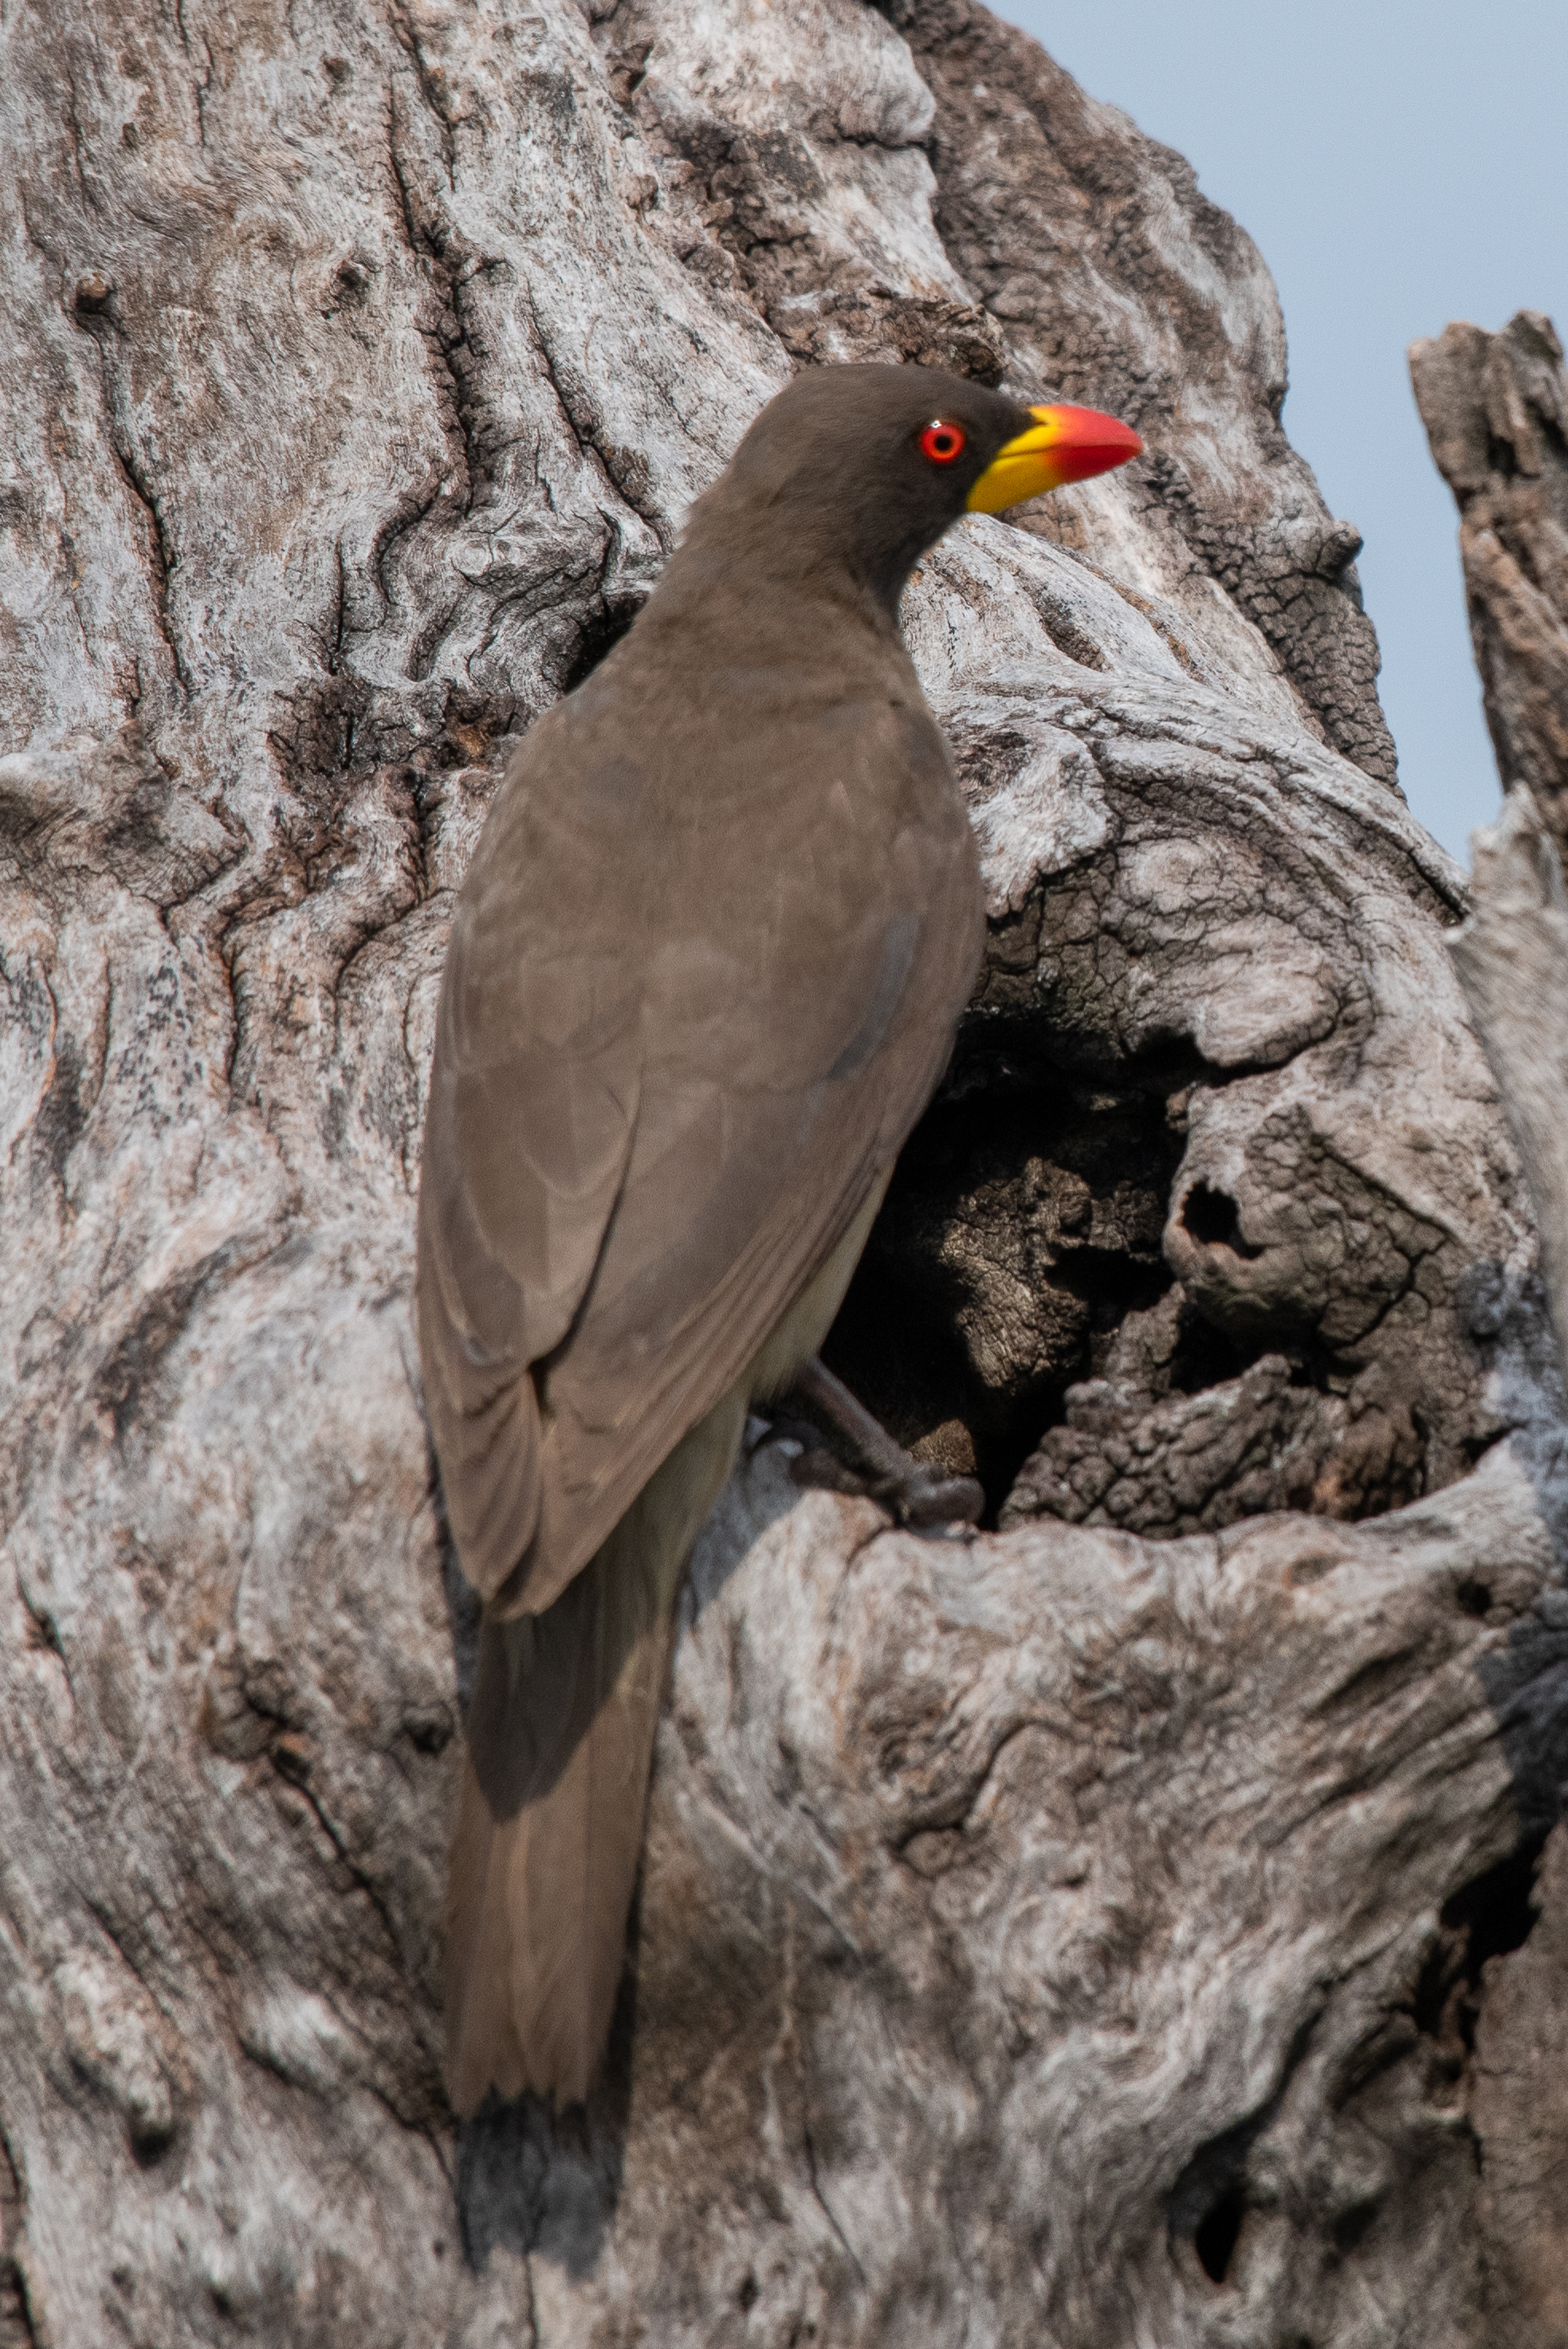 Yellow-billed oxpecker at nest, Chobe River, Namibia